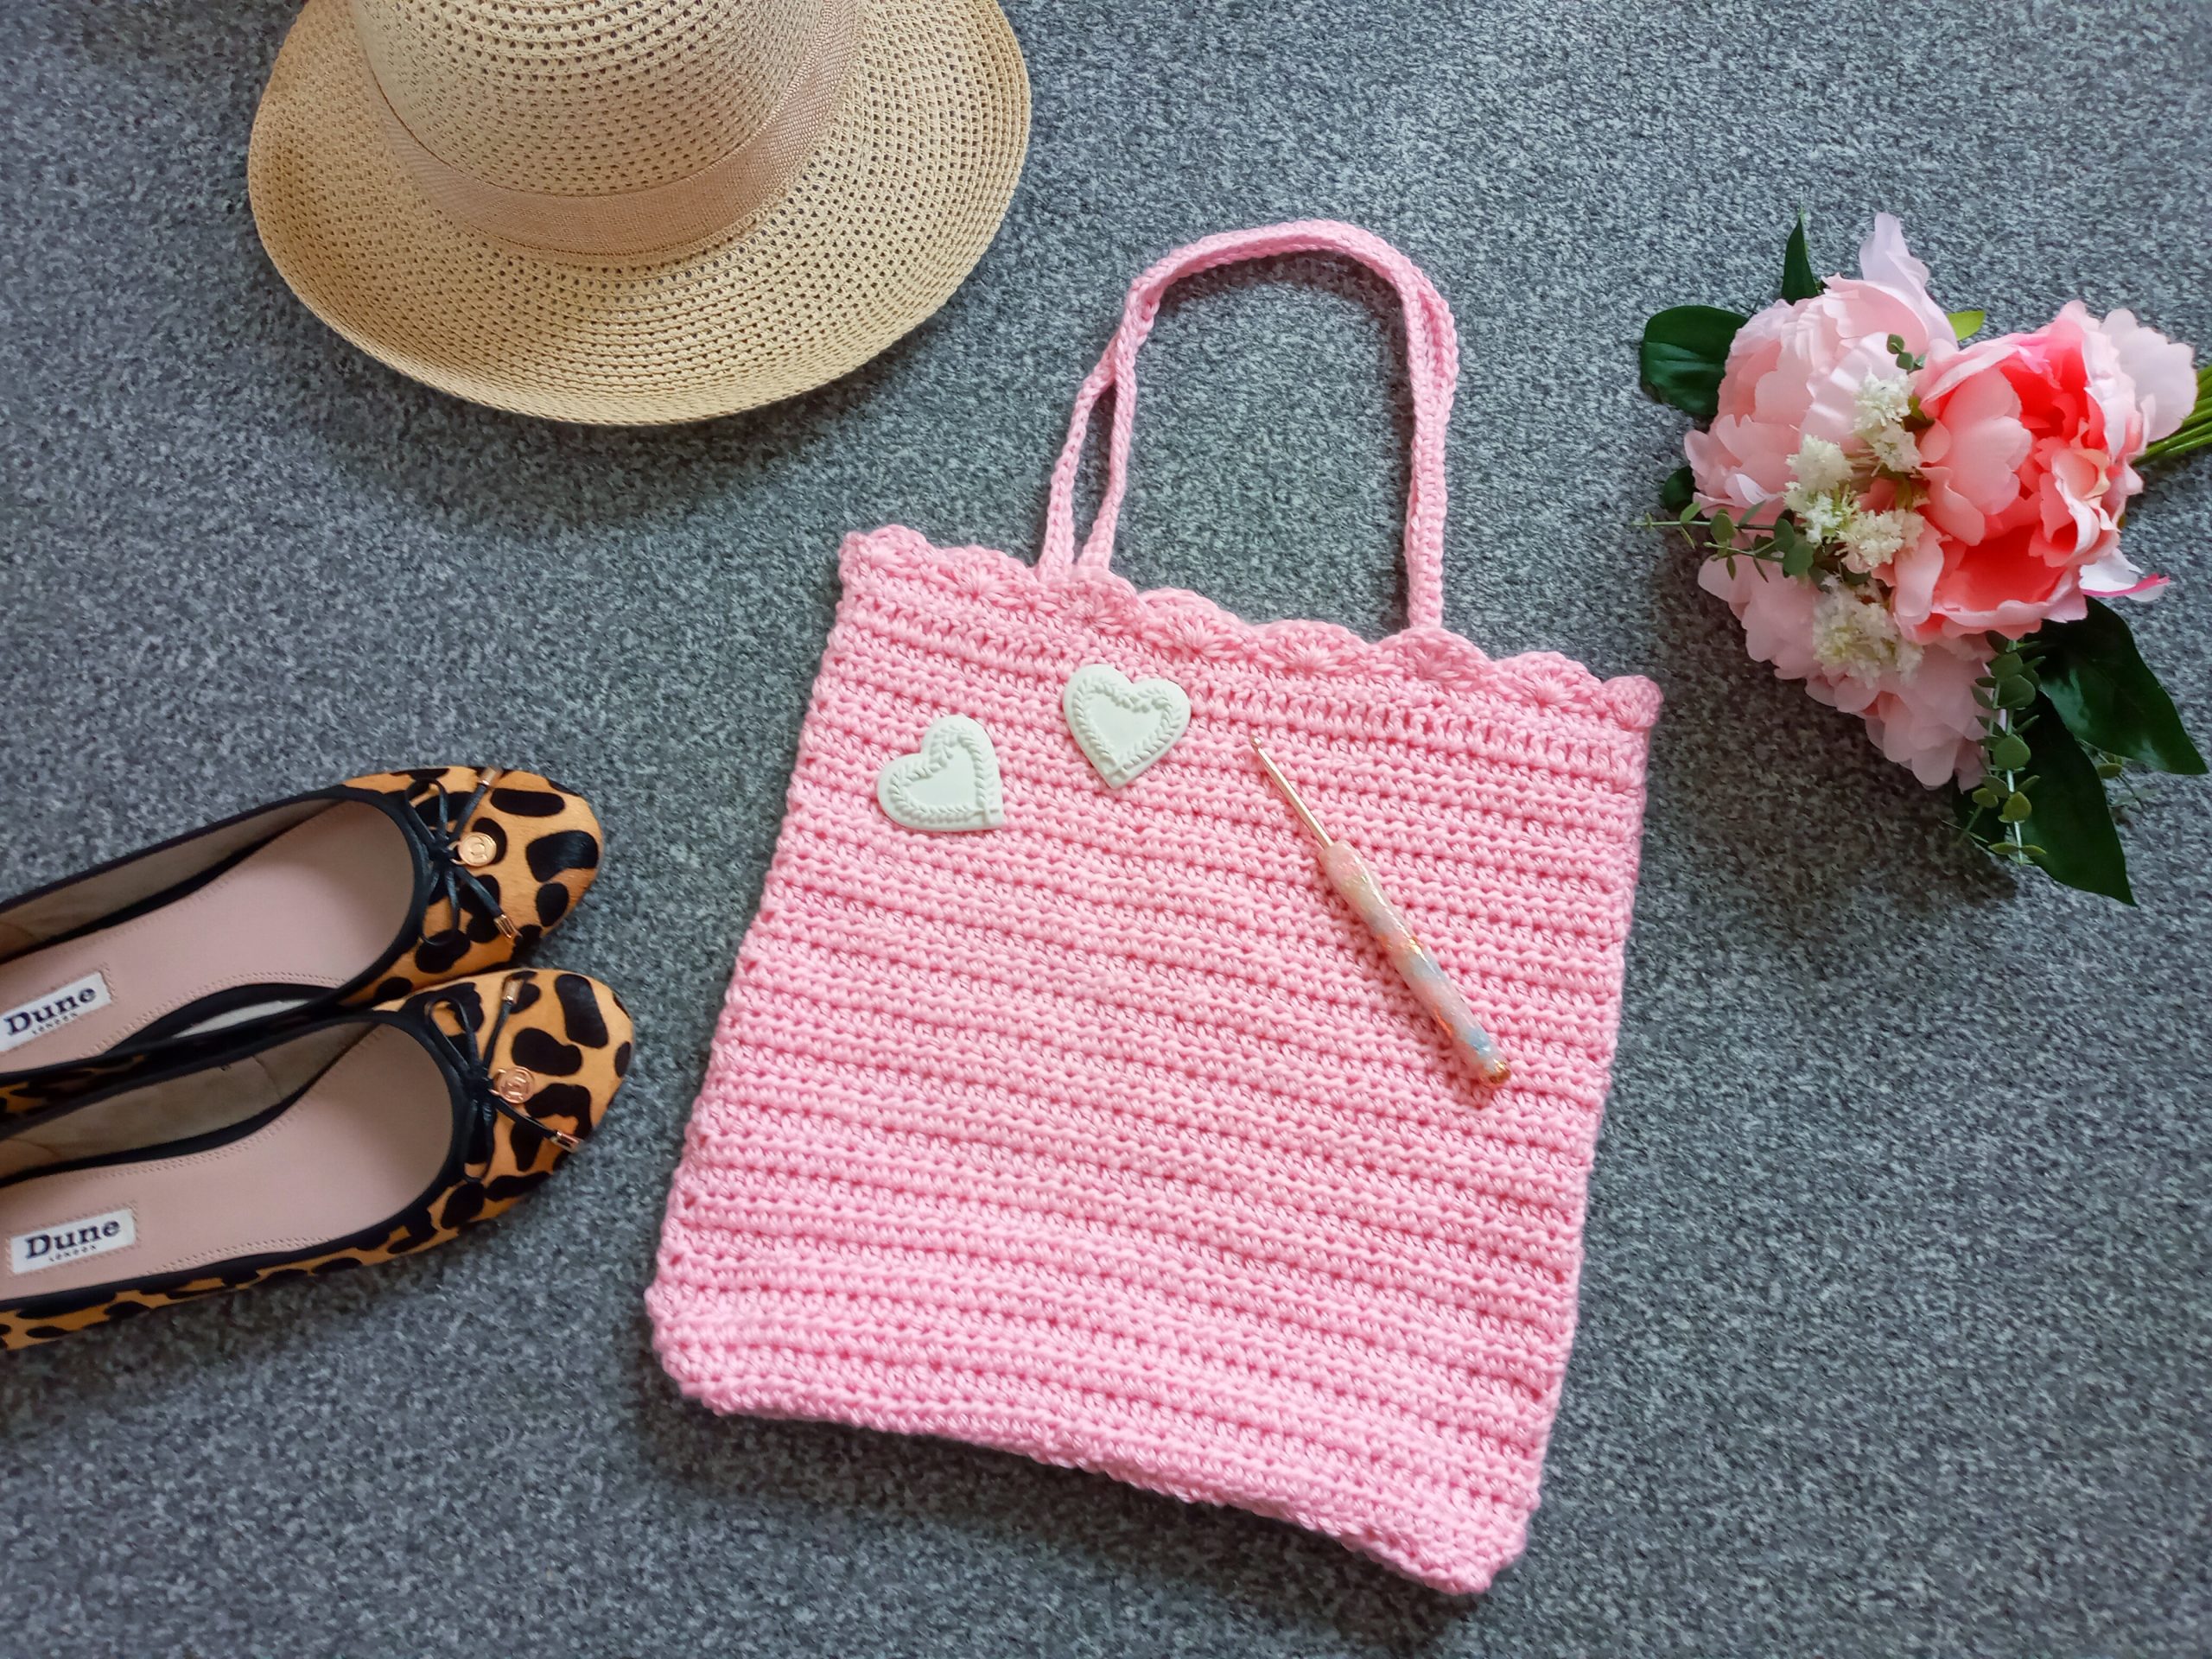 Handwoven Designer Cotton Crochet Crochet Tote Bag For Women Small Size,  Perfect For Summer Fashion, Beach And Puff Flower Design From Gavingg,  $19.04 | DHgate.Com